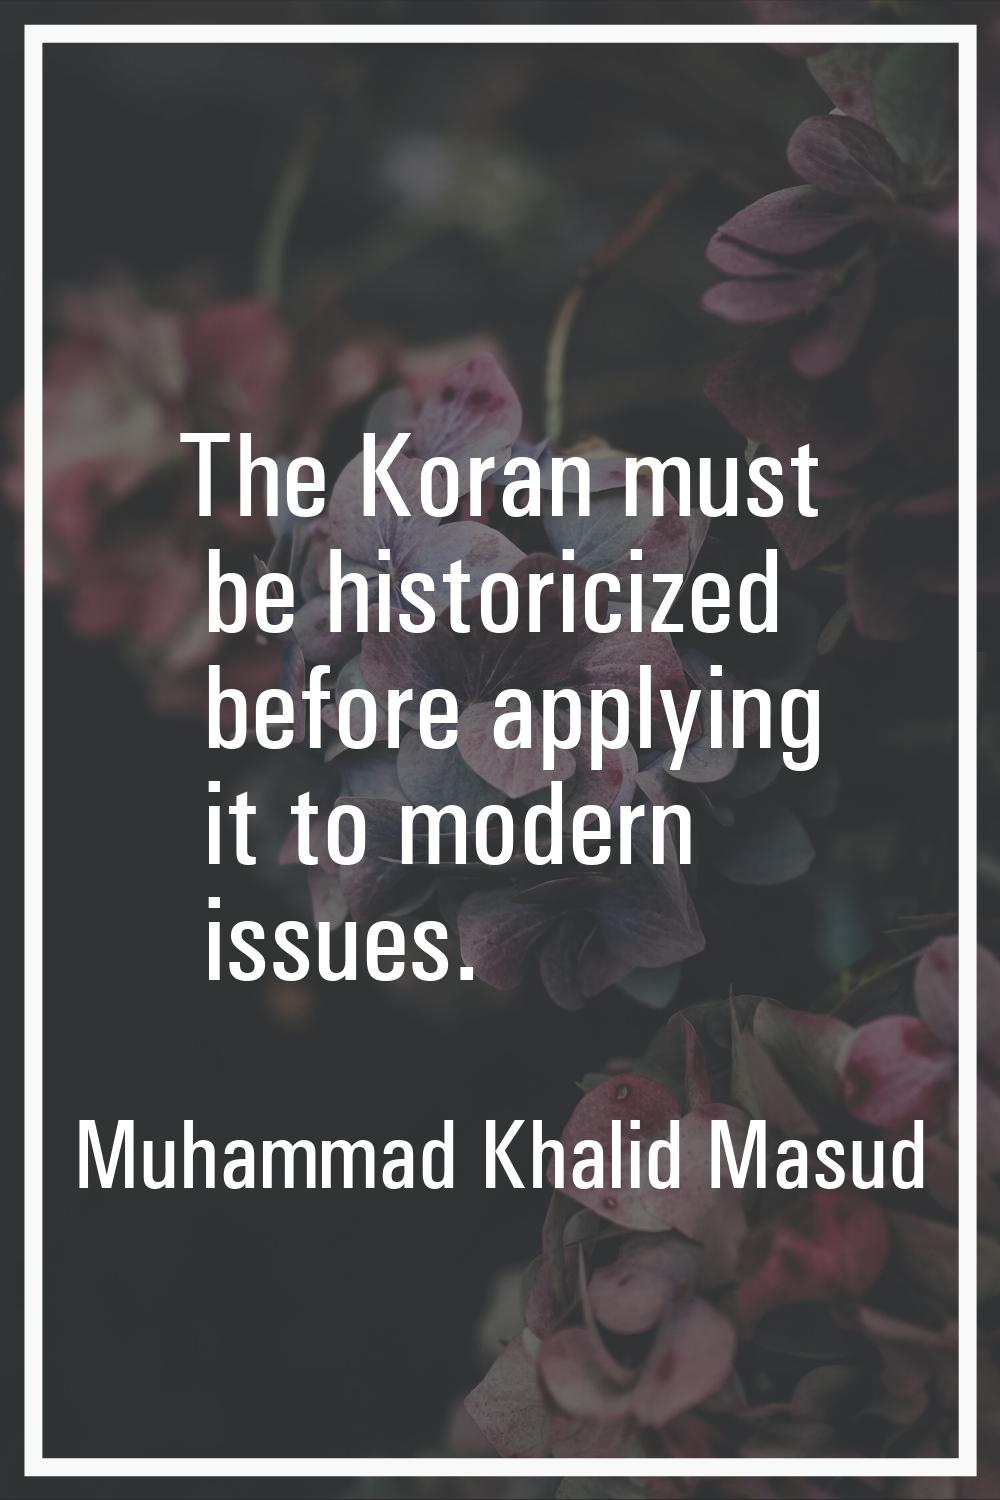 The Koran must be historicized before applying it to modern issues.